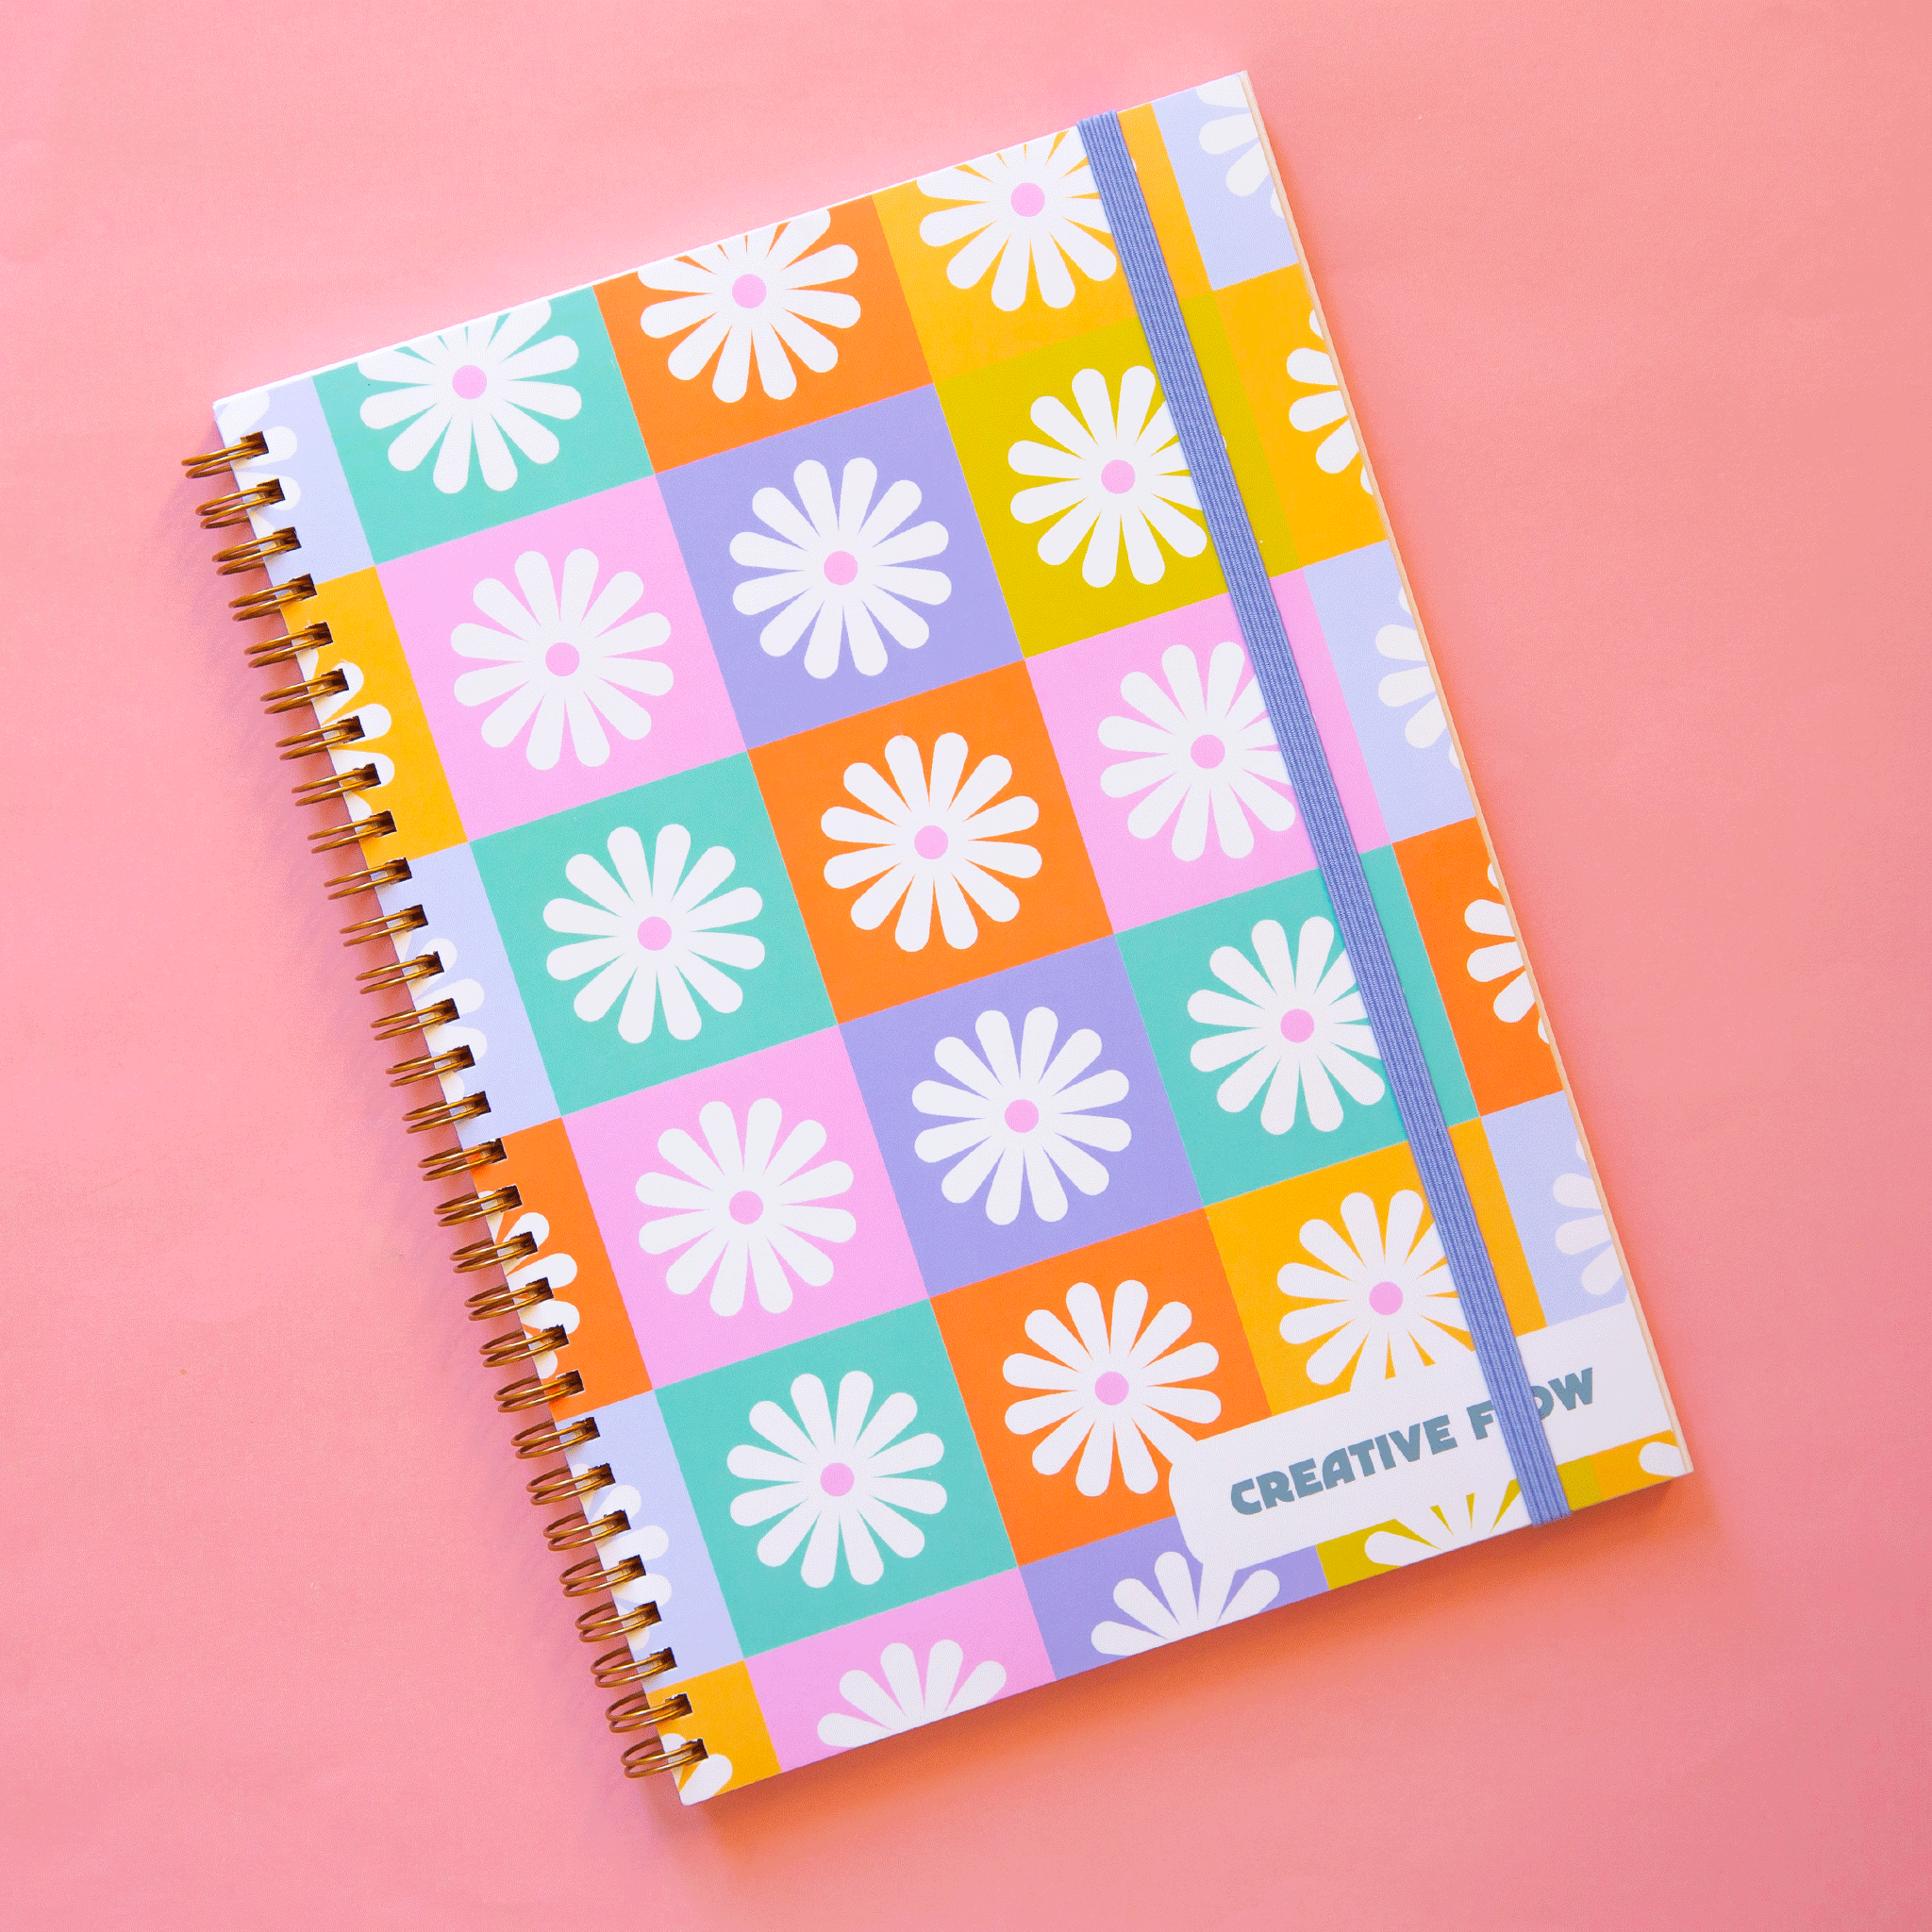  A spiral bound notebook with a multicolored checker design that has a white daisy in the center of each square. In the bottom right hand corner it says, "Creative Flow" in green text.